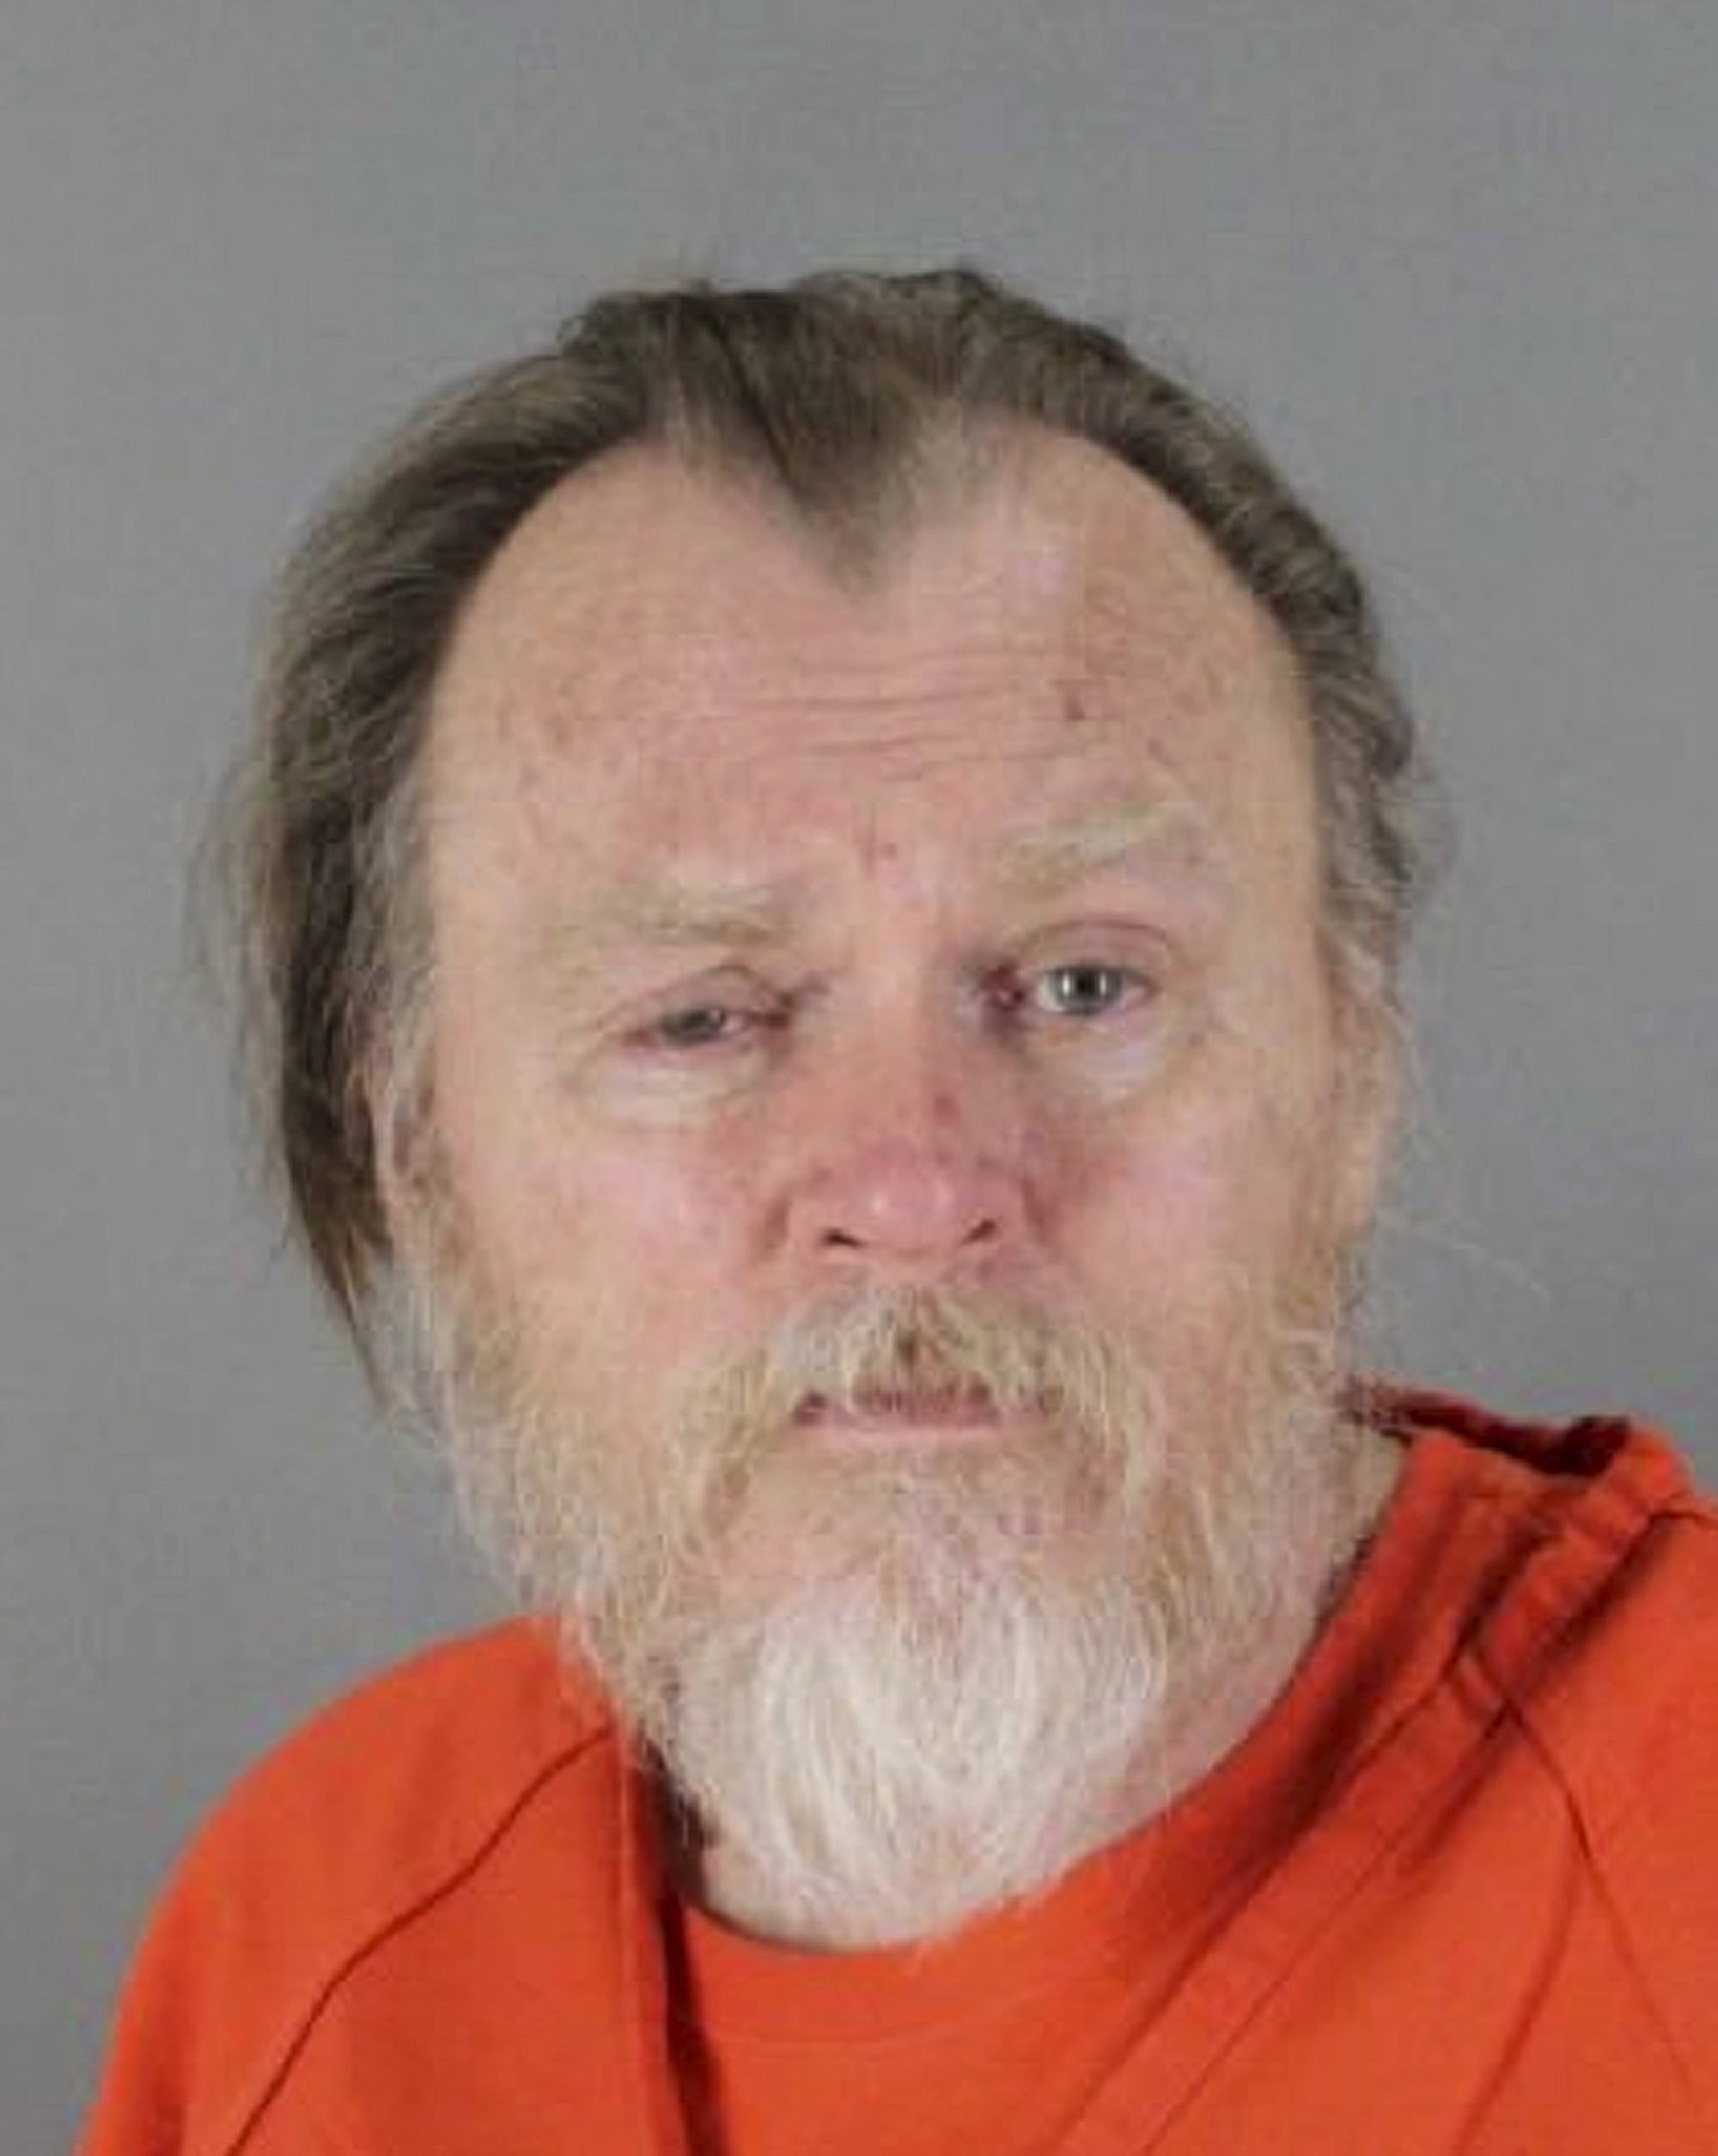 Rodney Halbower, Oregon prison inmate charged with two counts of murder connected to a string of serial killings.